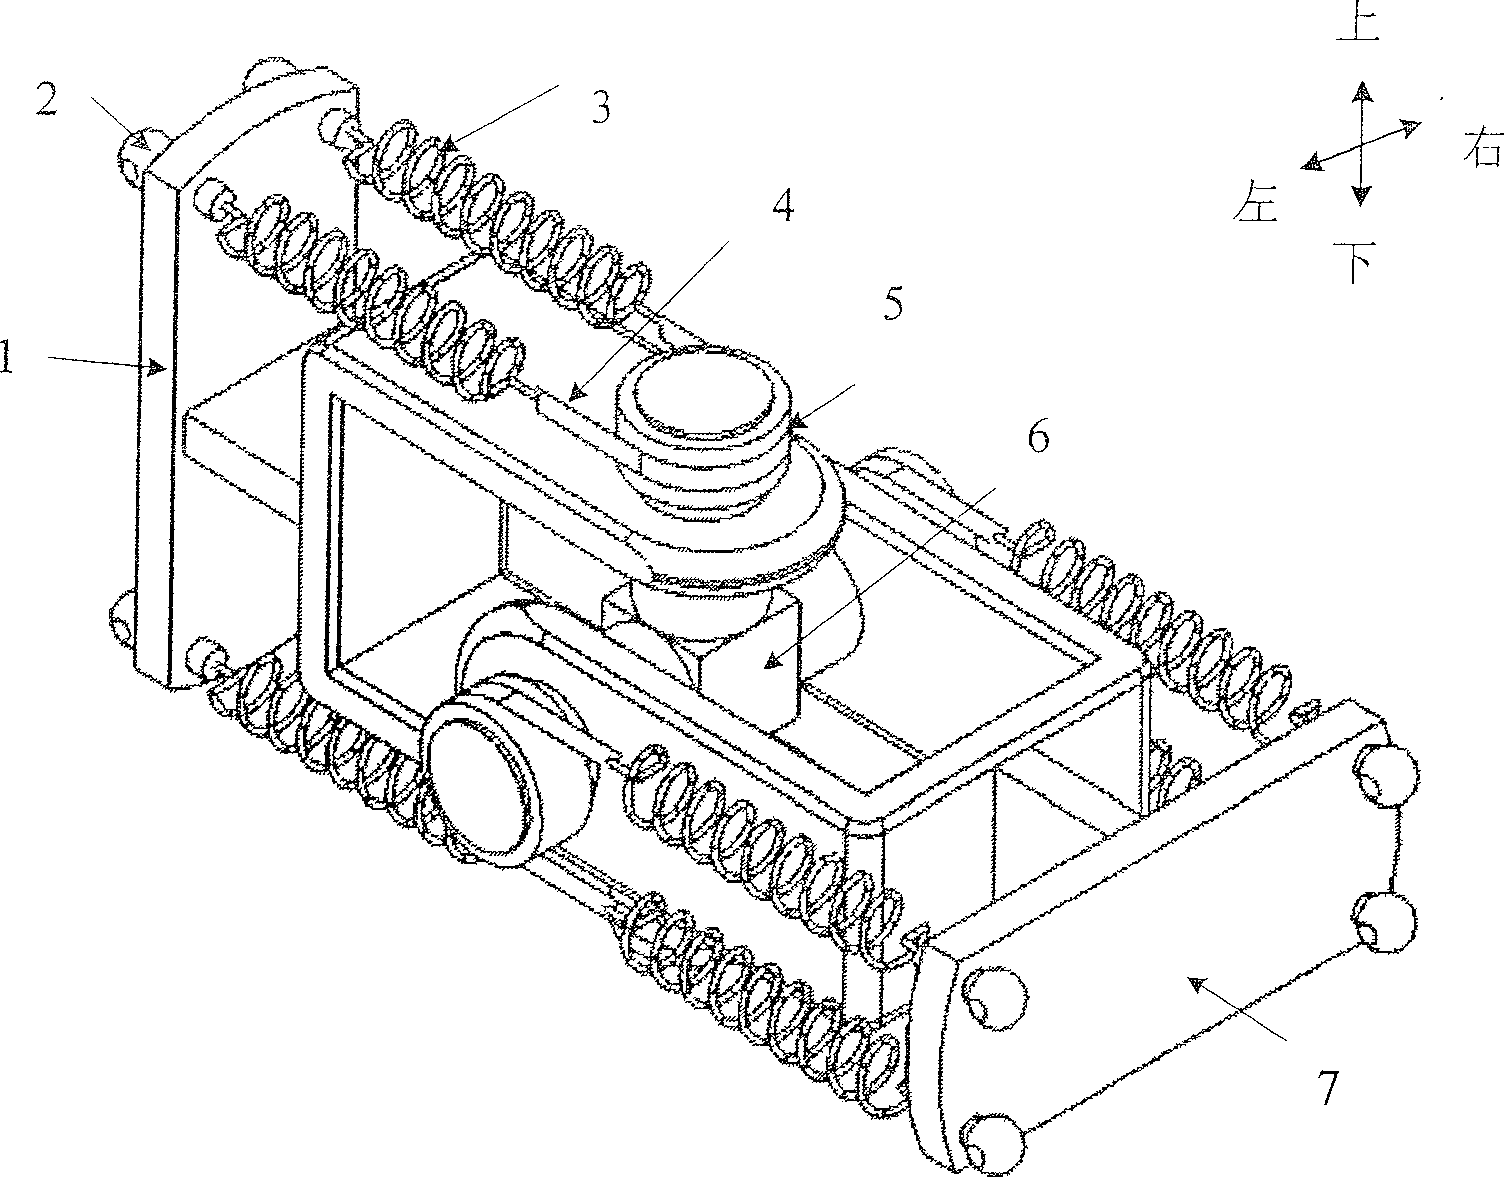 Driving joint for cross axle type robot based on shape memory alloy